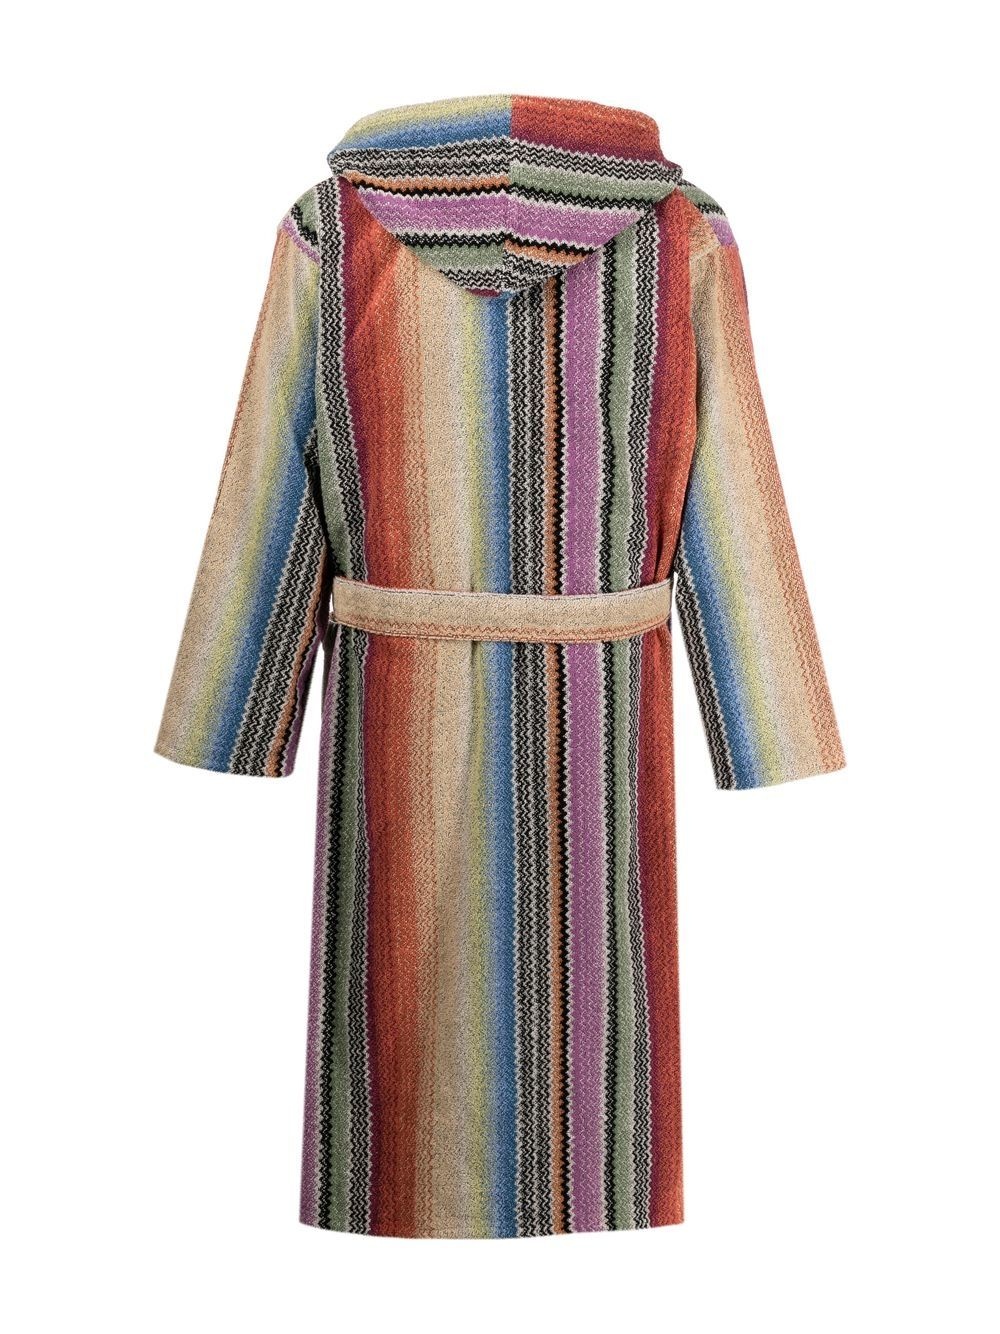 Archie zigzag pattern hooded robe - 3